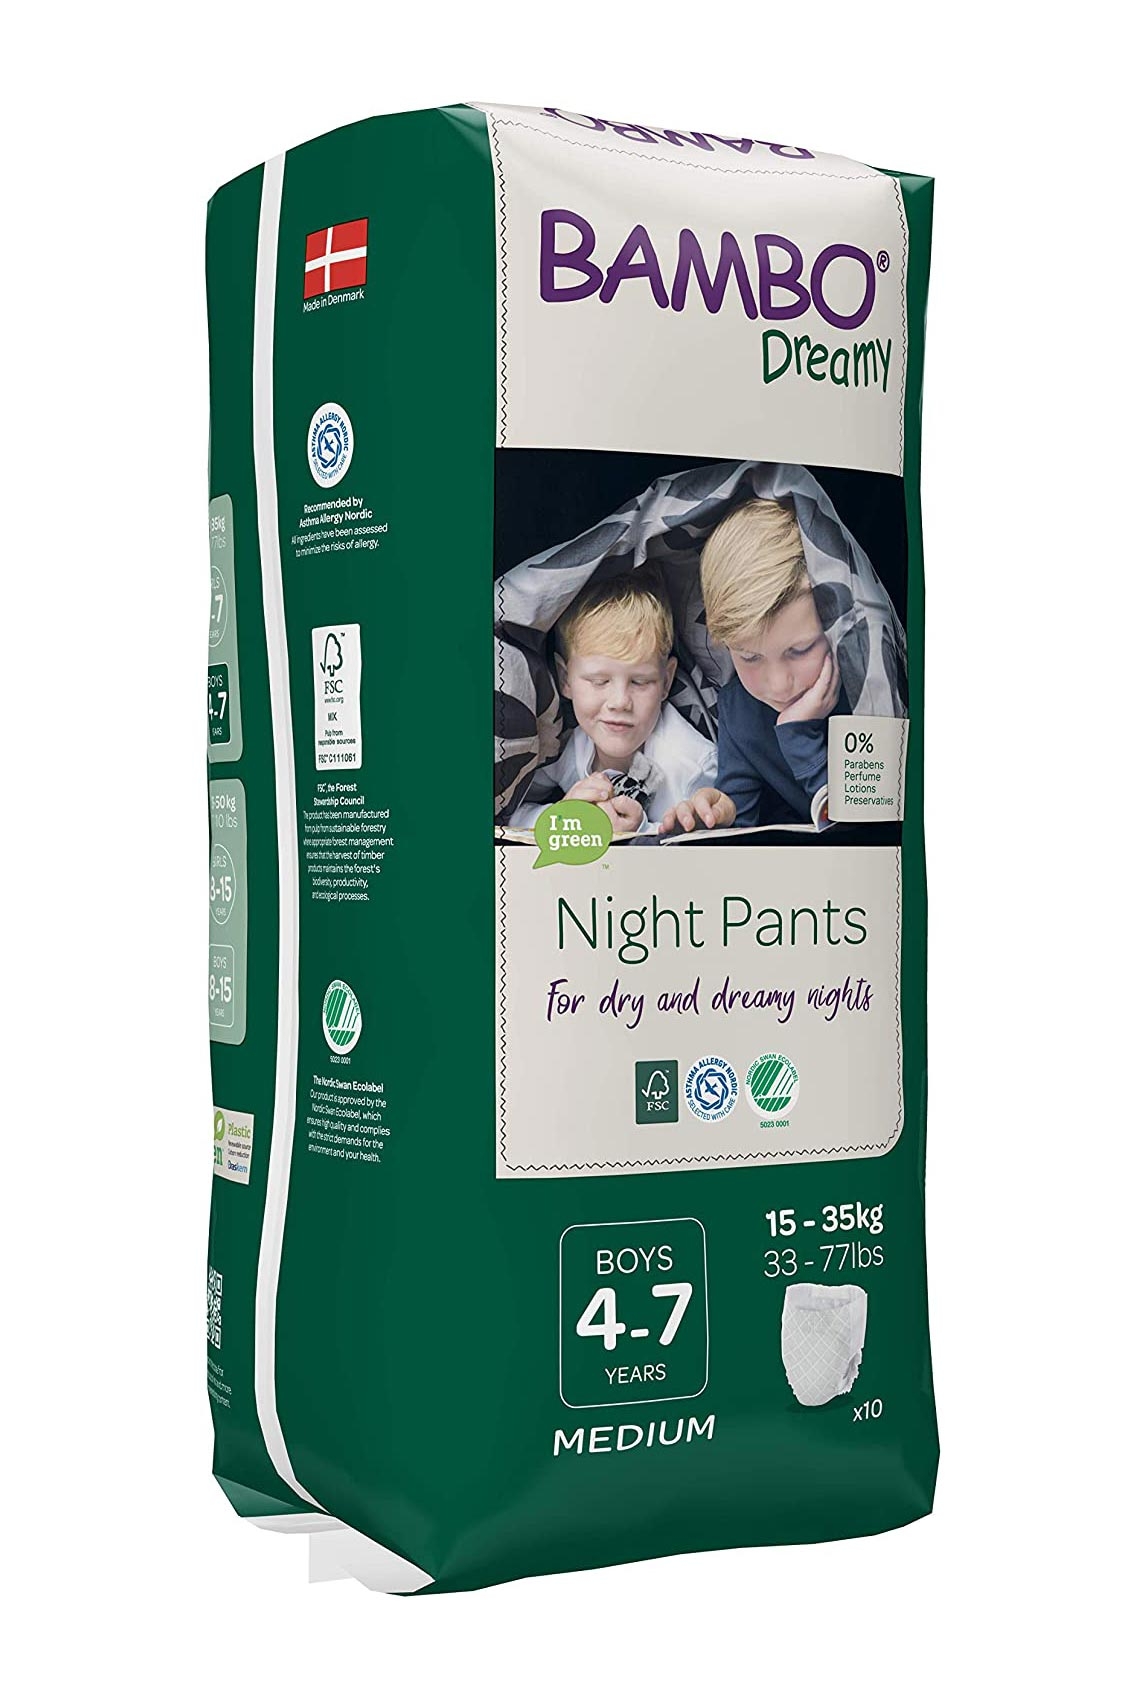 Bambo Dreamy - Night Pants Junge / Boy - 4 bis 7 Jahre (15-35 kg) - 10 St. Pack